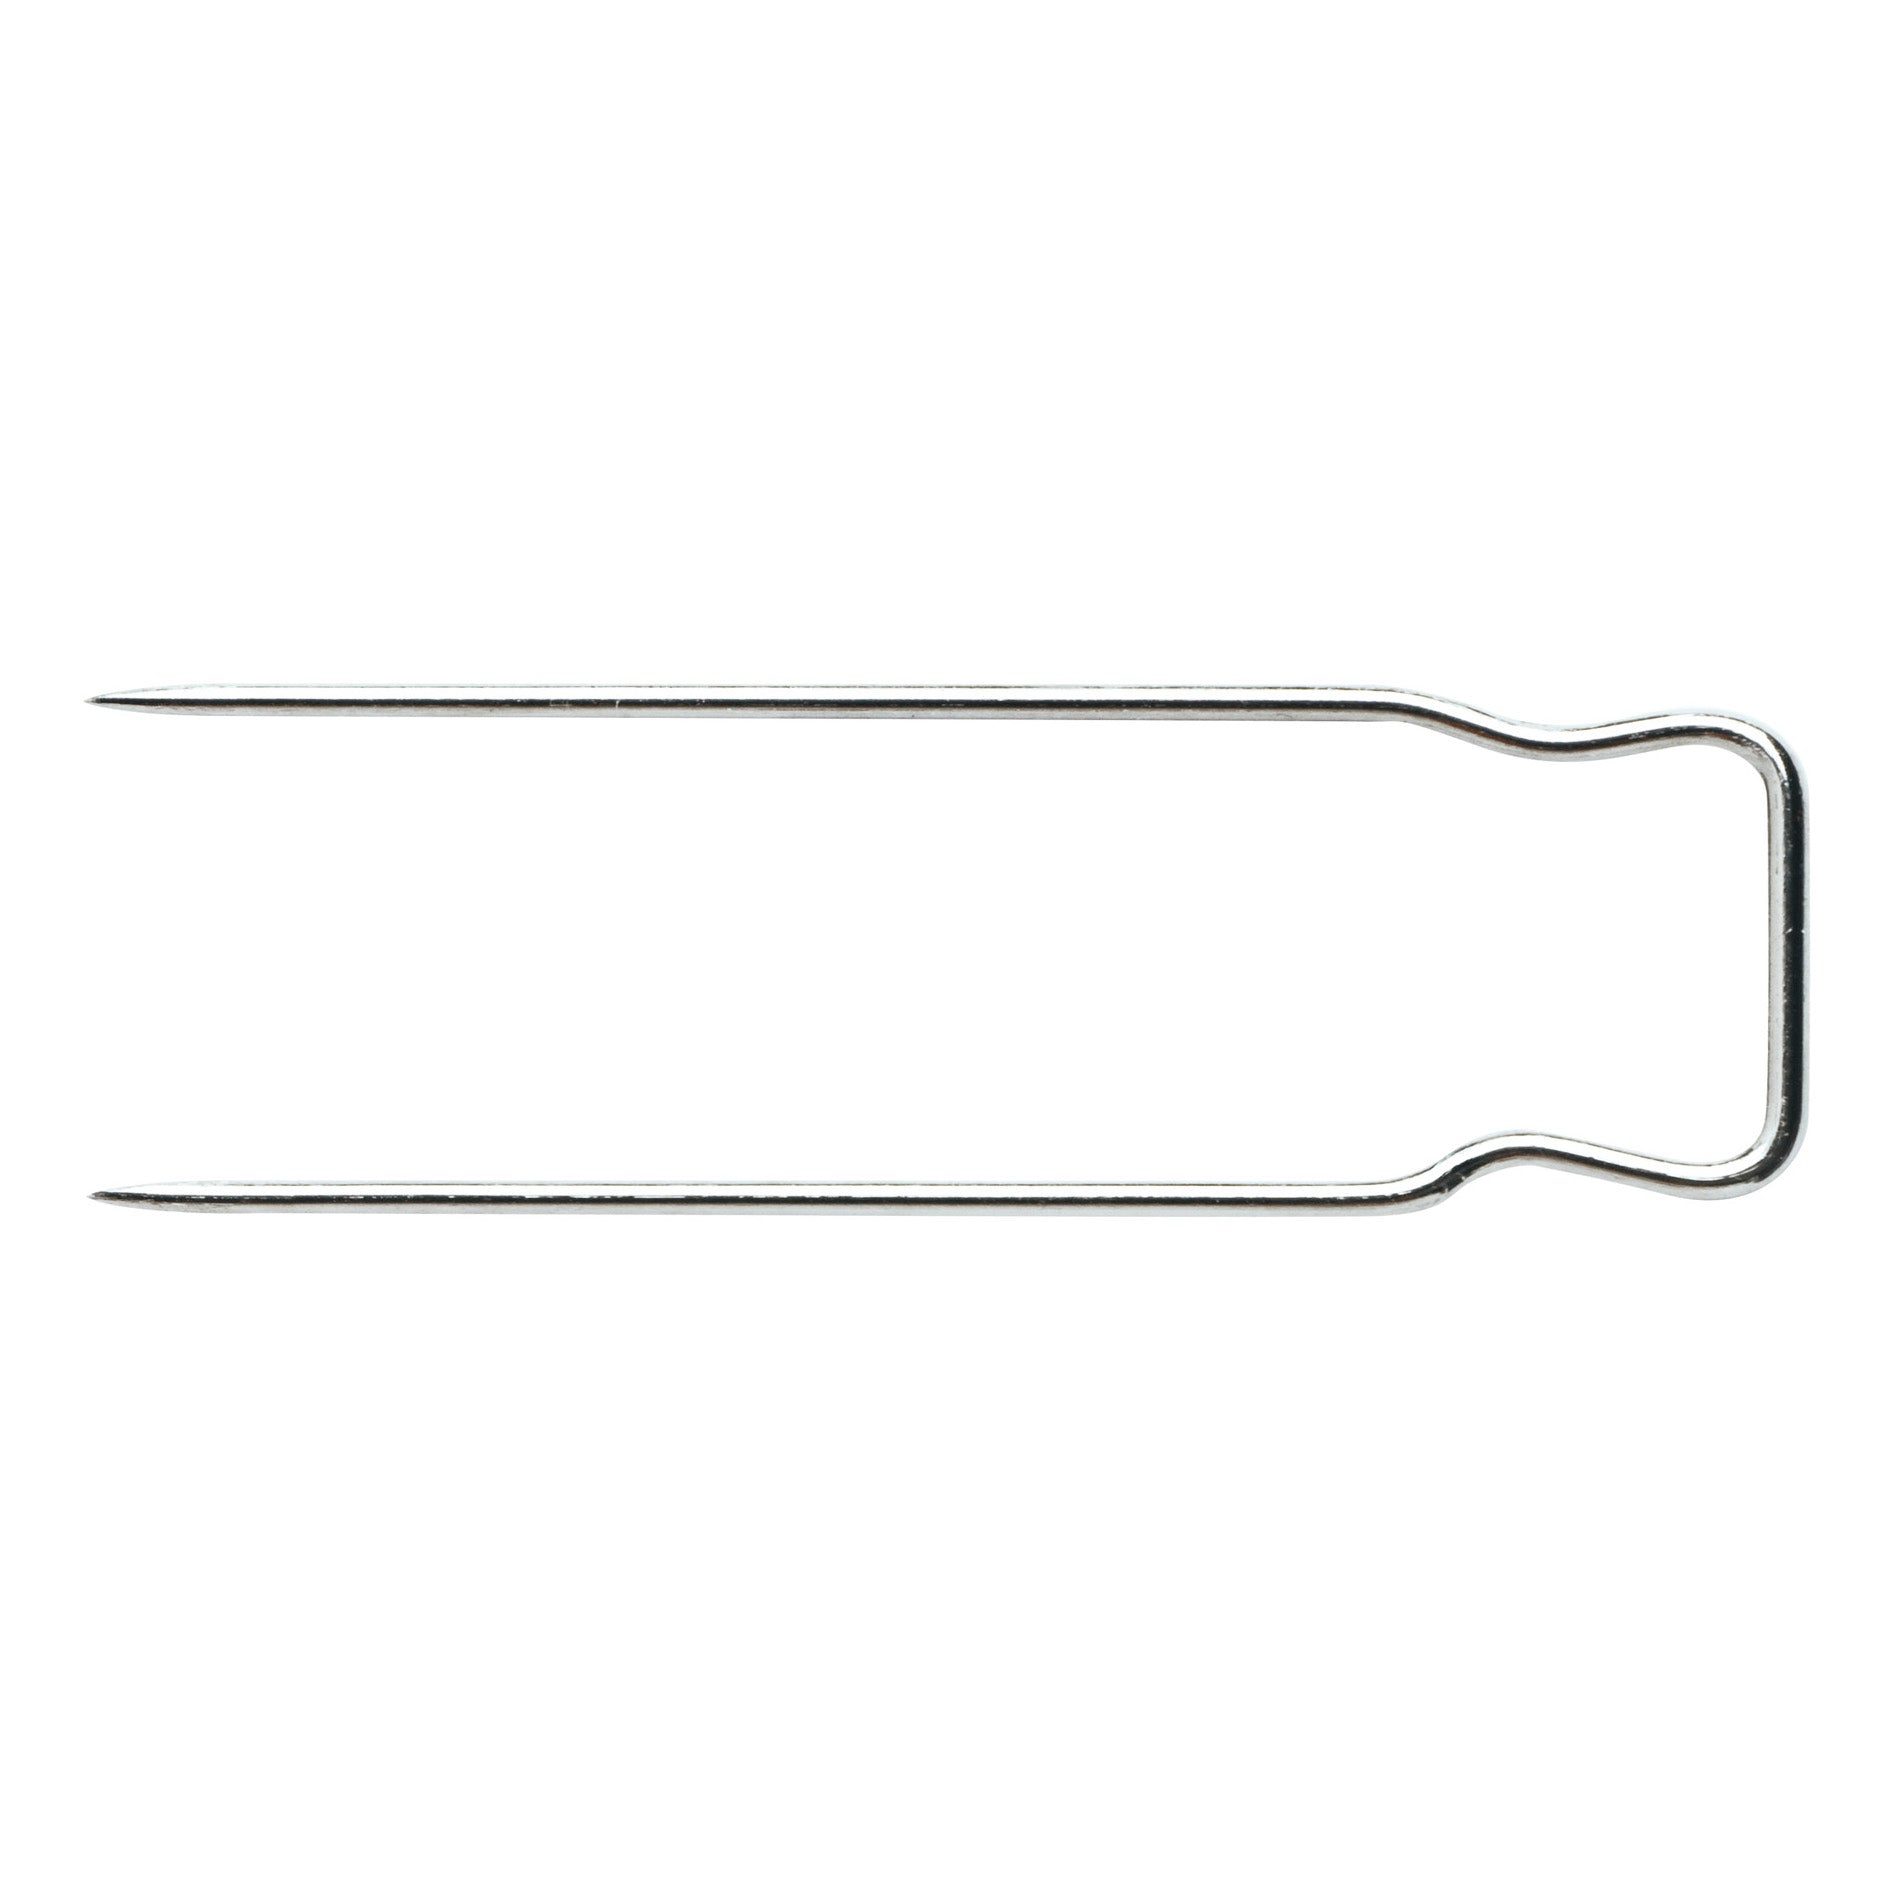 Milward 32mm Loose Cover Pins- 6 Pieces - Pound A Metre